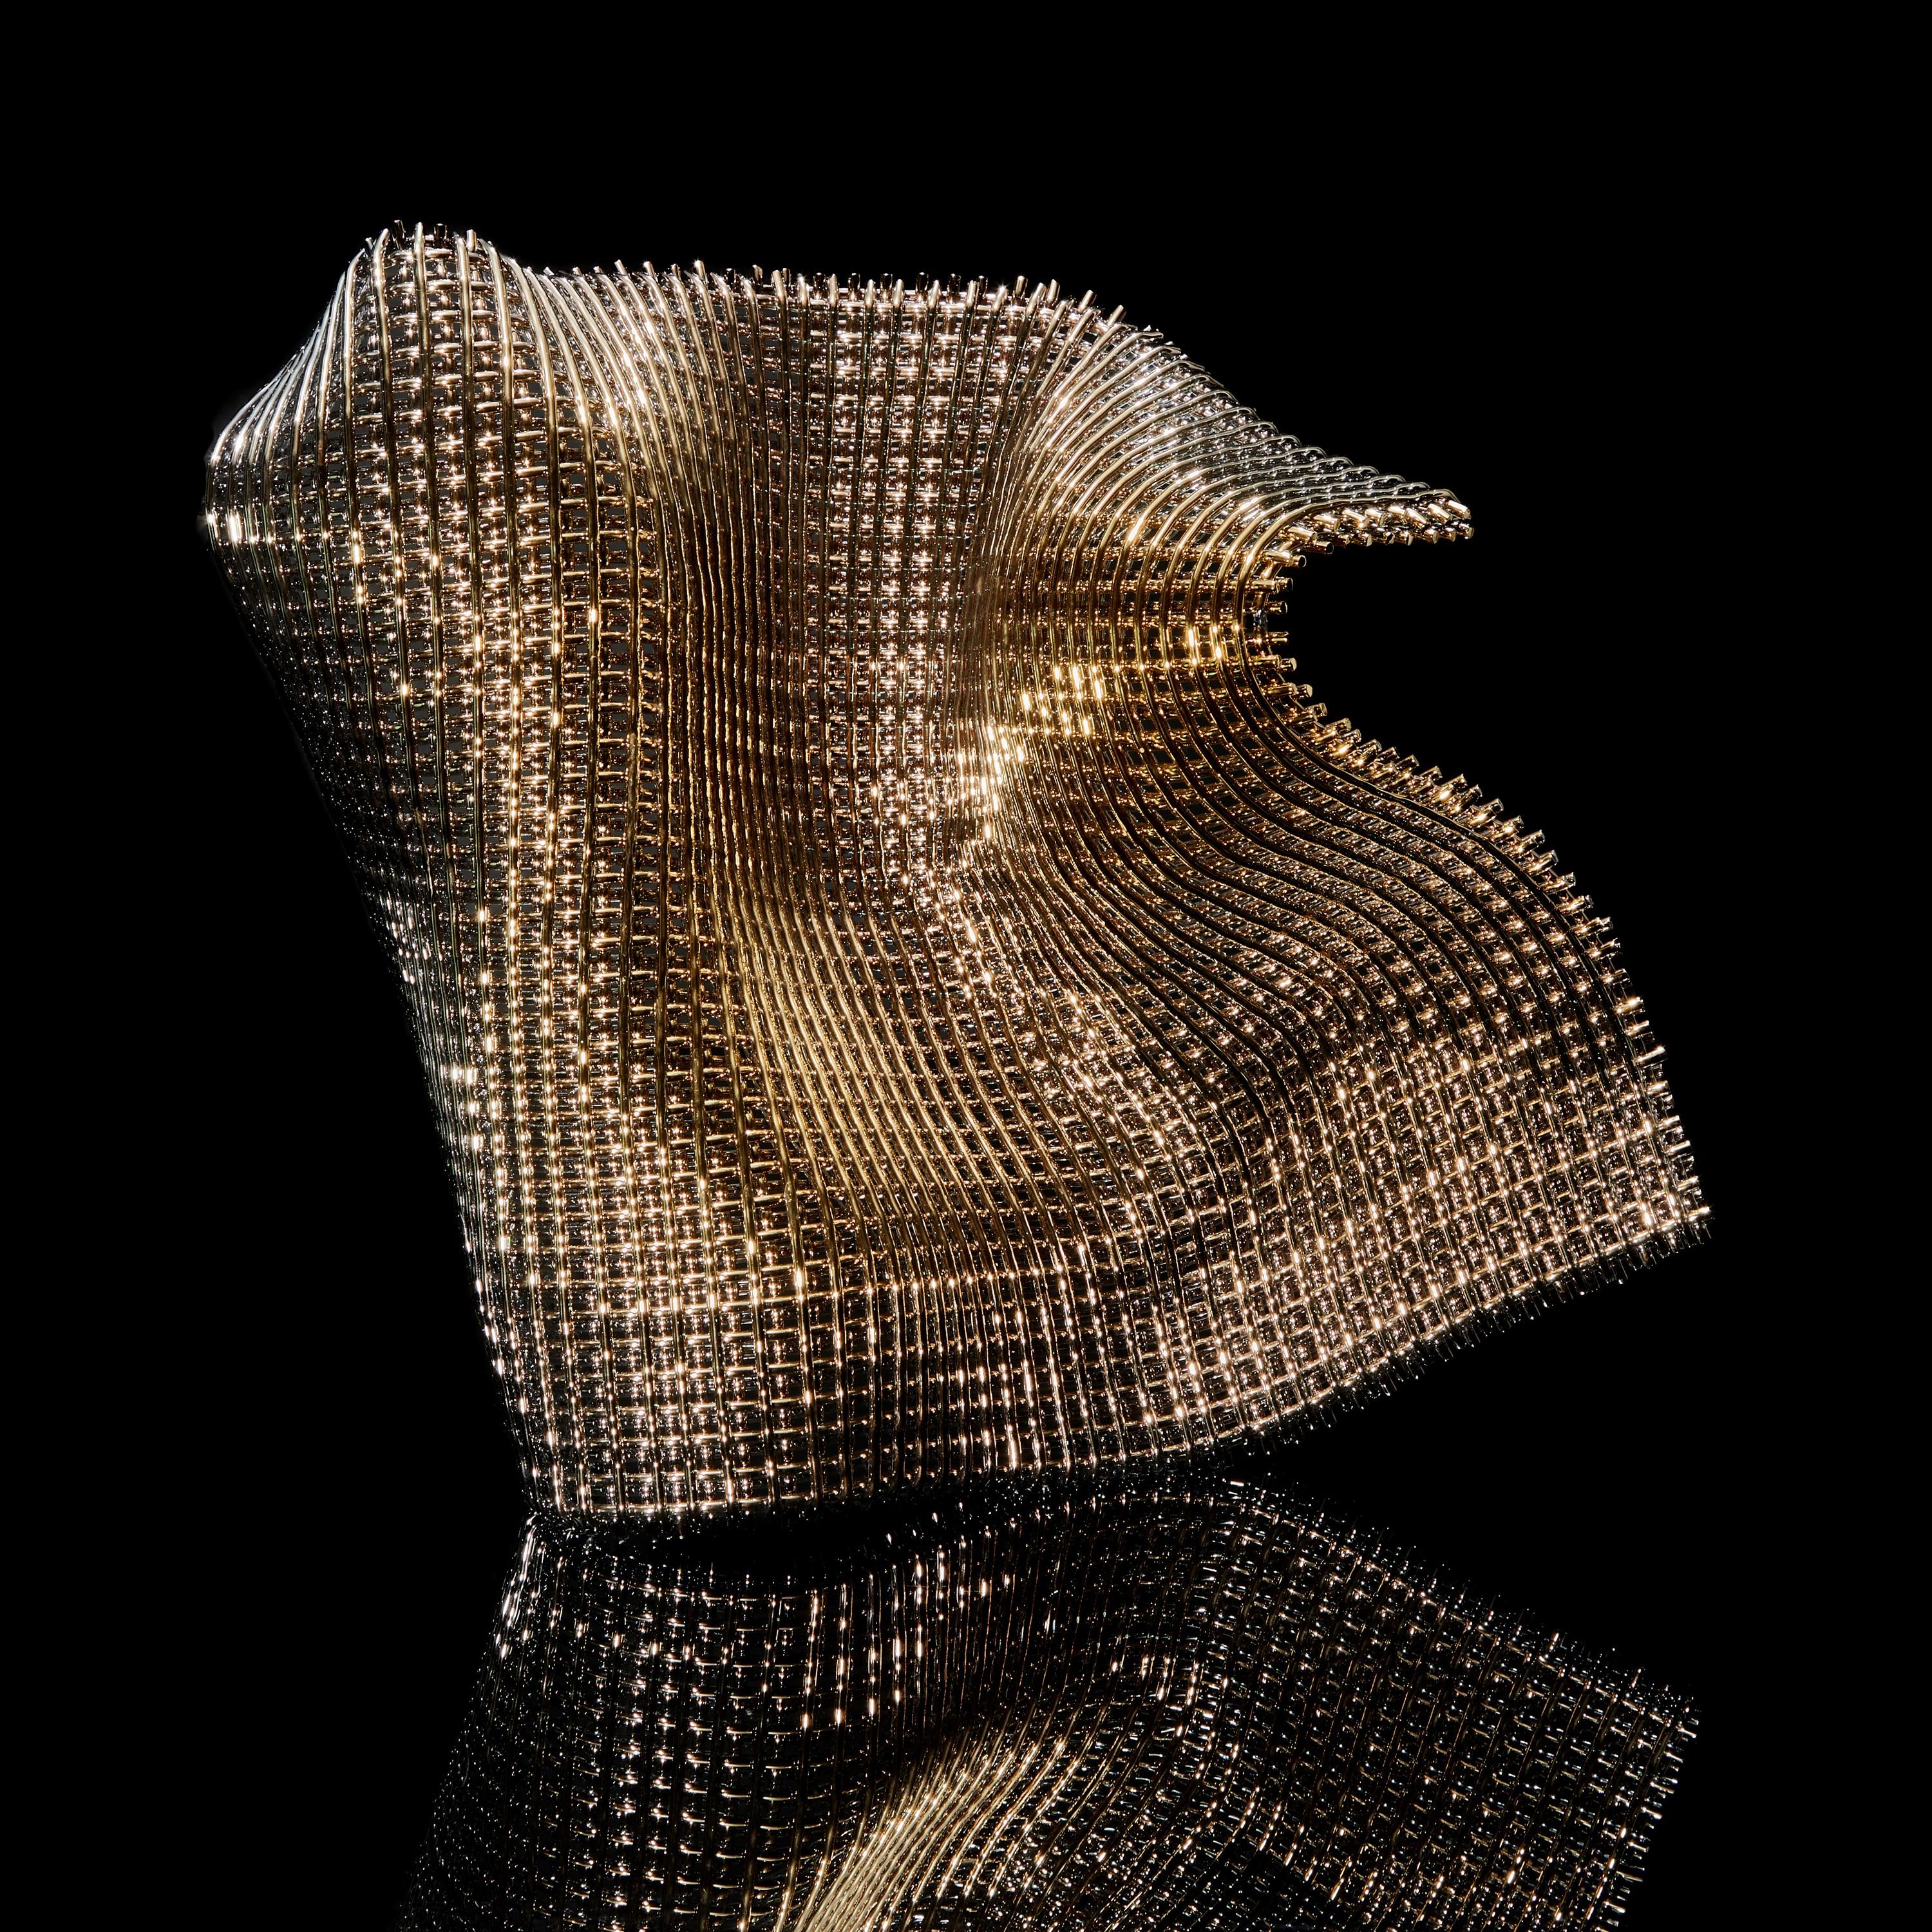 Hand-Crafted Masquerade, a Golden Woven Glass Standing Sculpture by Cathryn Shilling